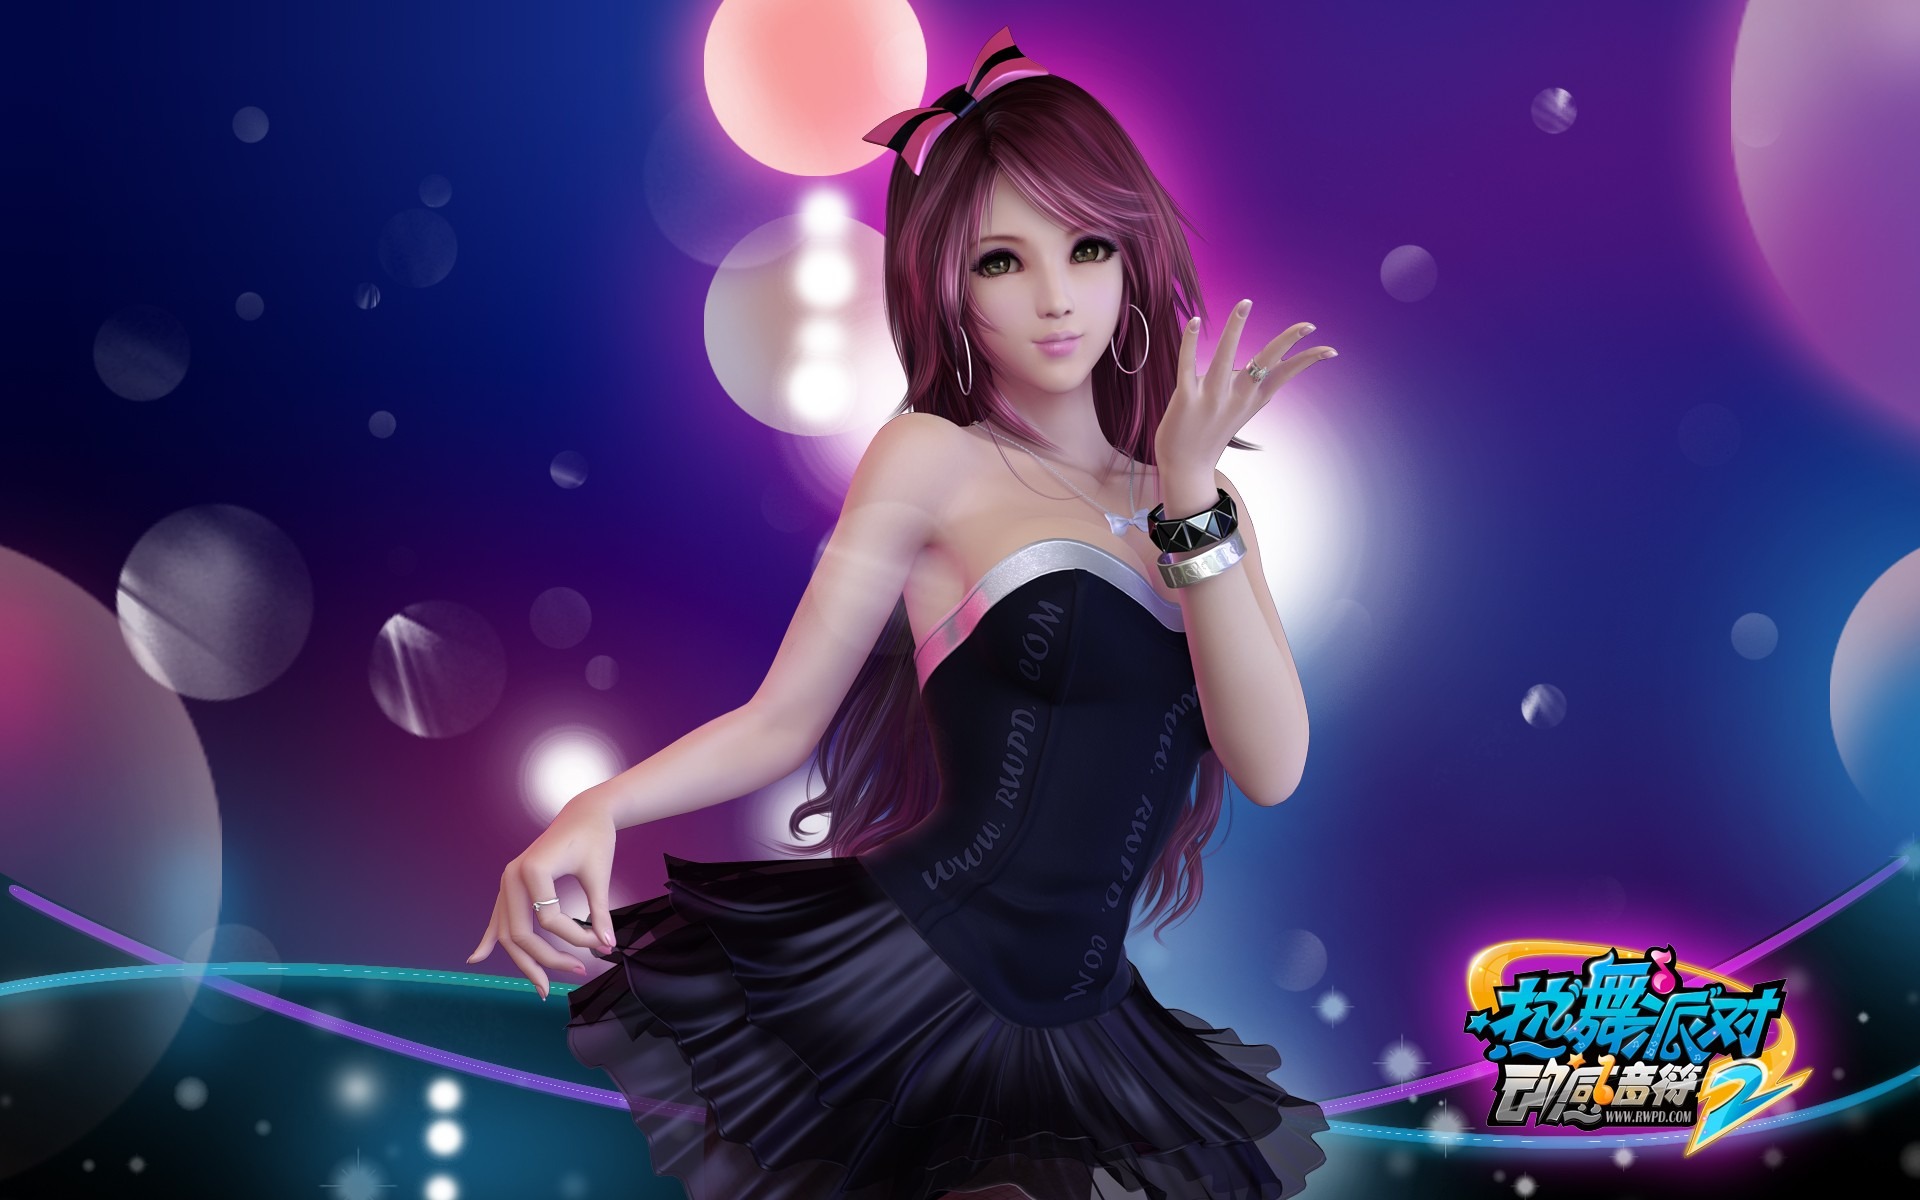 Online game Hot Dance Party II official wallpapers #32 - 1920x1200